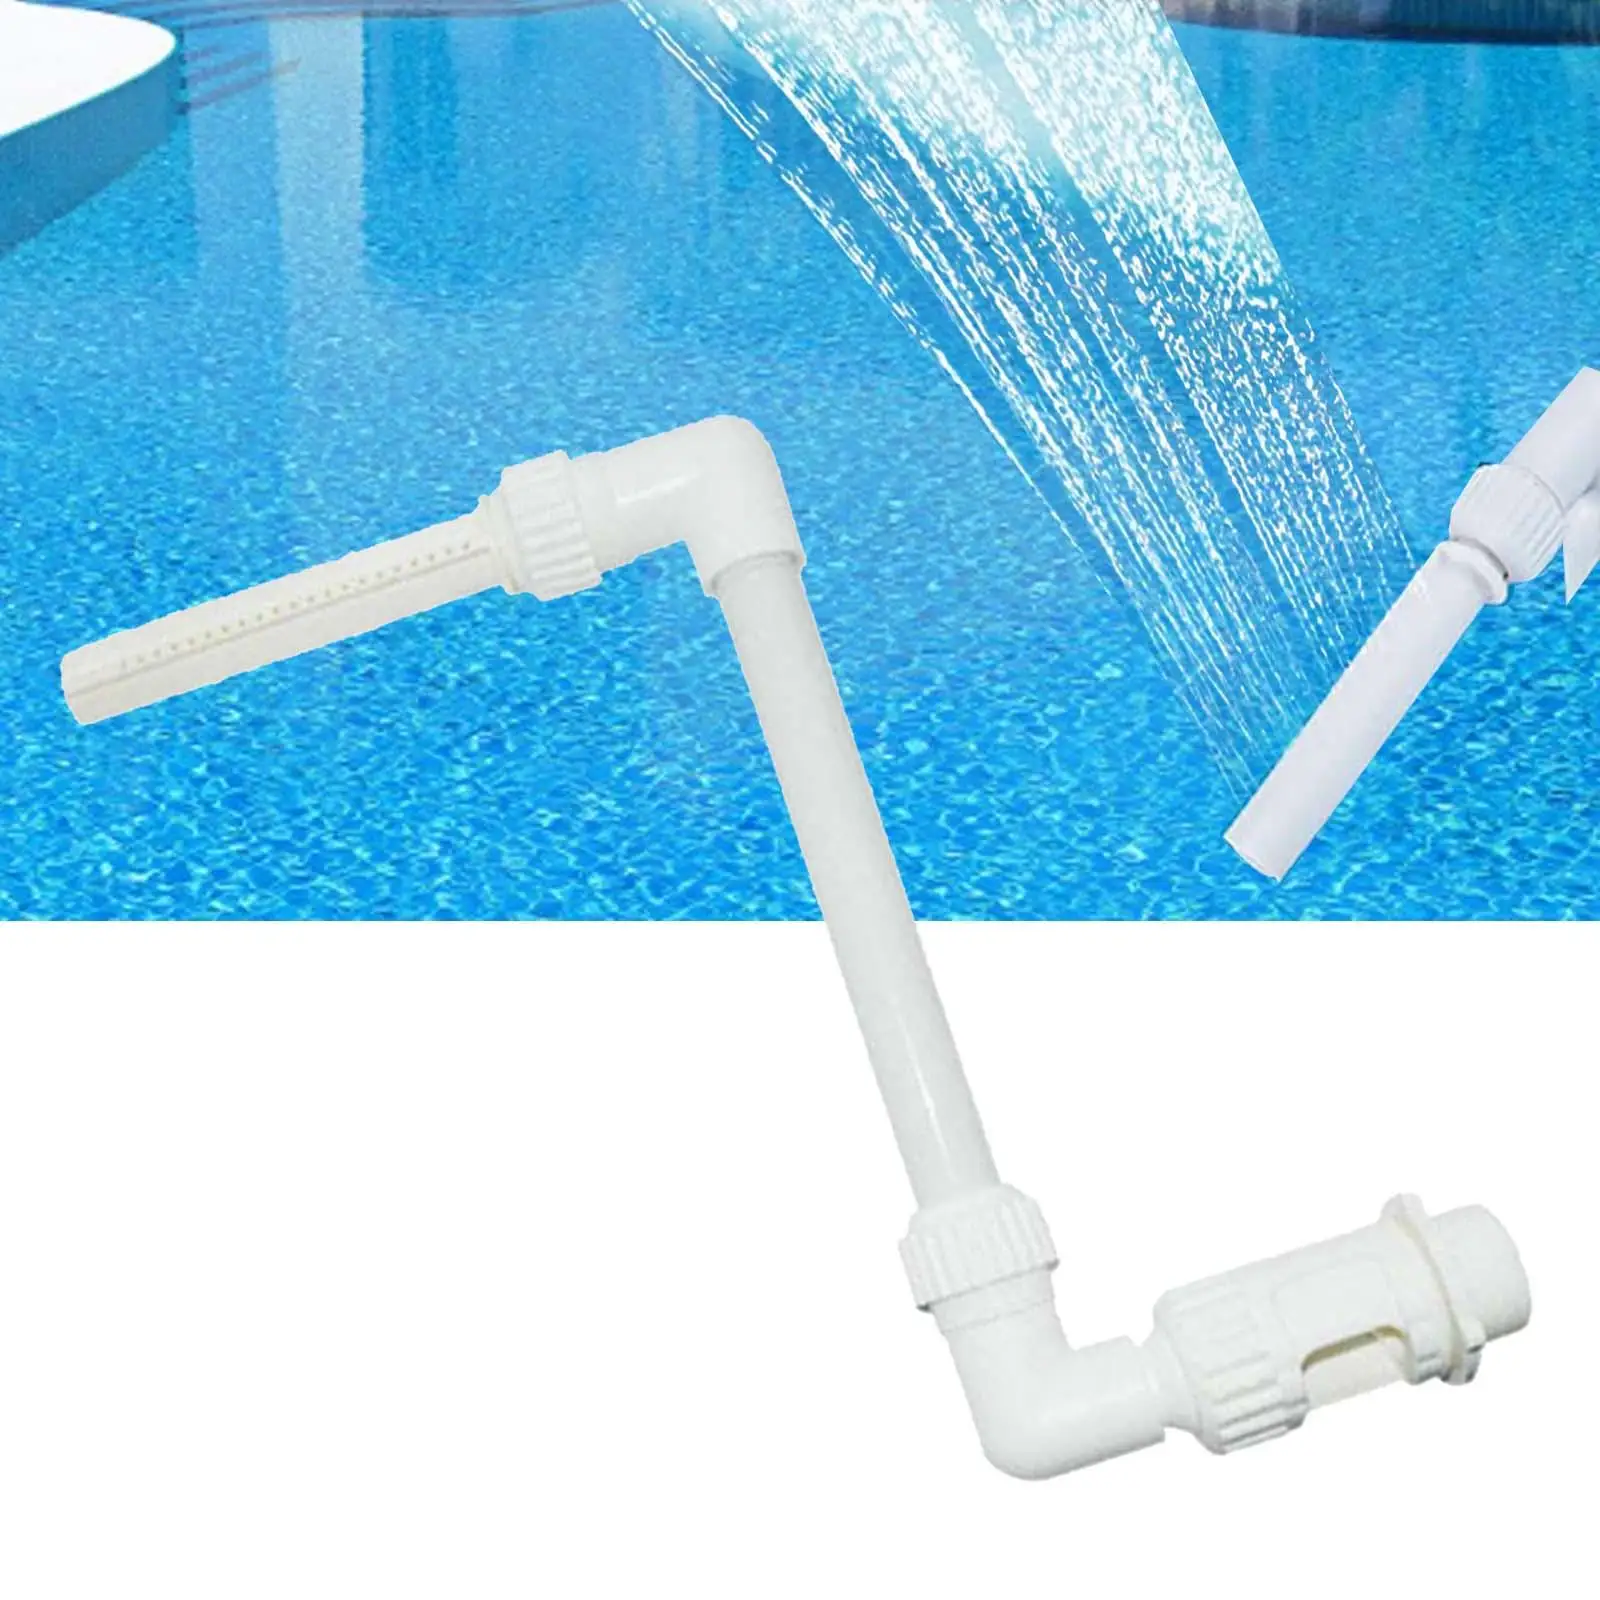 Cooling Aerator Adjustable Pool Aerator Pool Waterfall Spray for Backyard in Ground SPA Outdoor above Ground